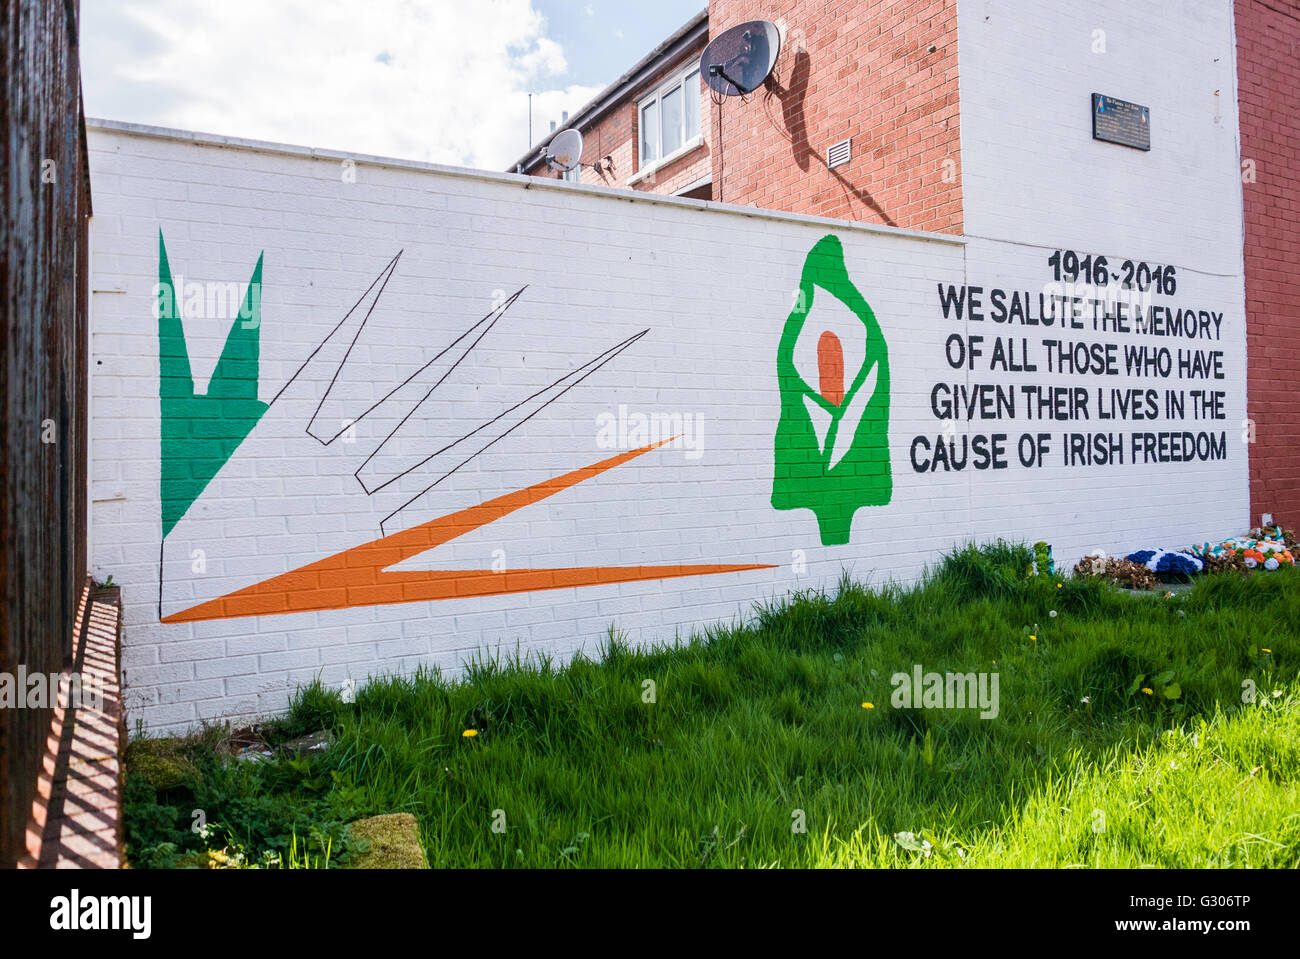 Belfast mural in commemoration of those who have given their lives in the cause of Irish Freedom from 1916 to 2016. Stock Photo